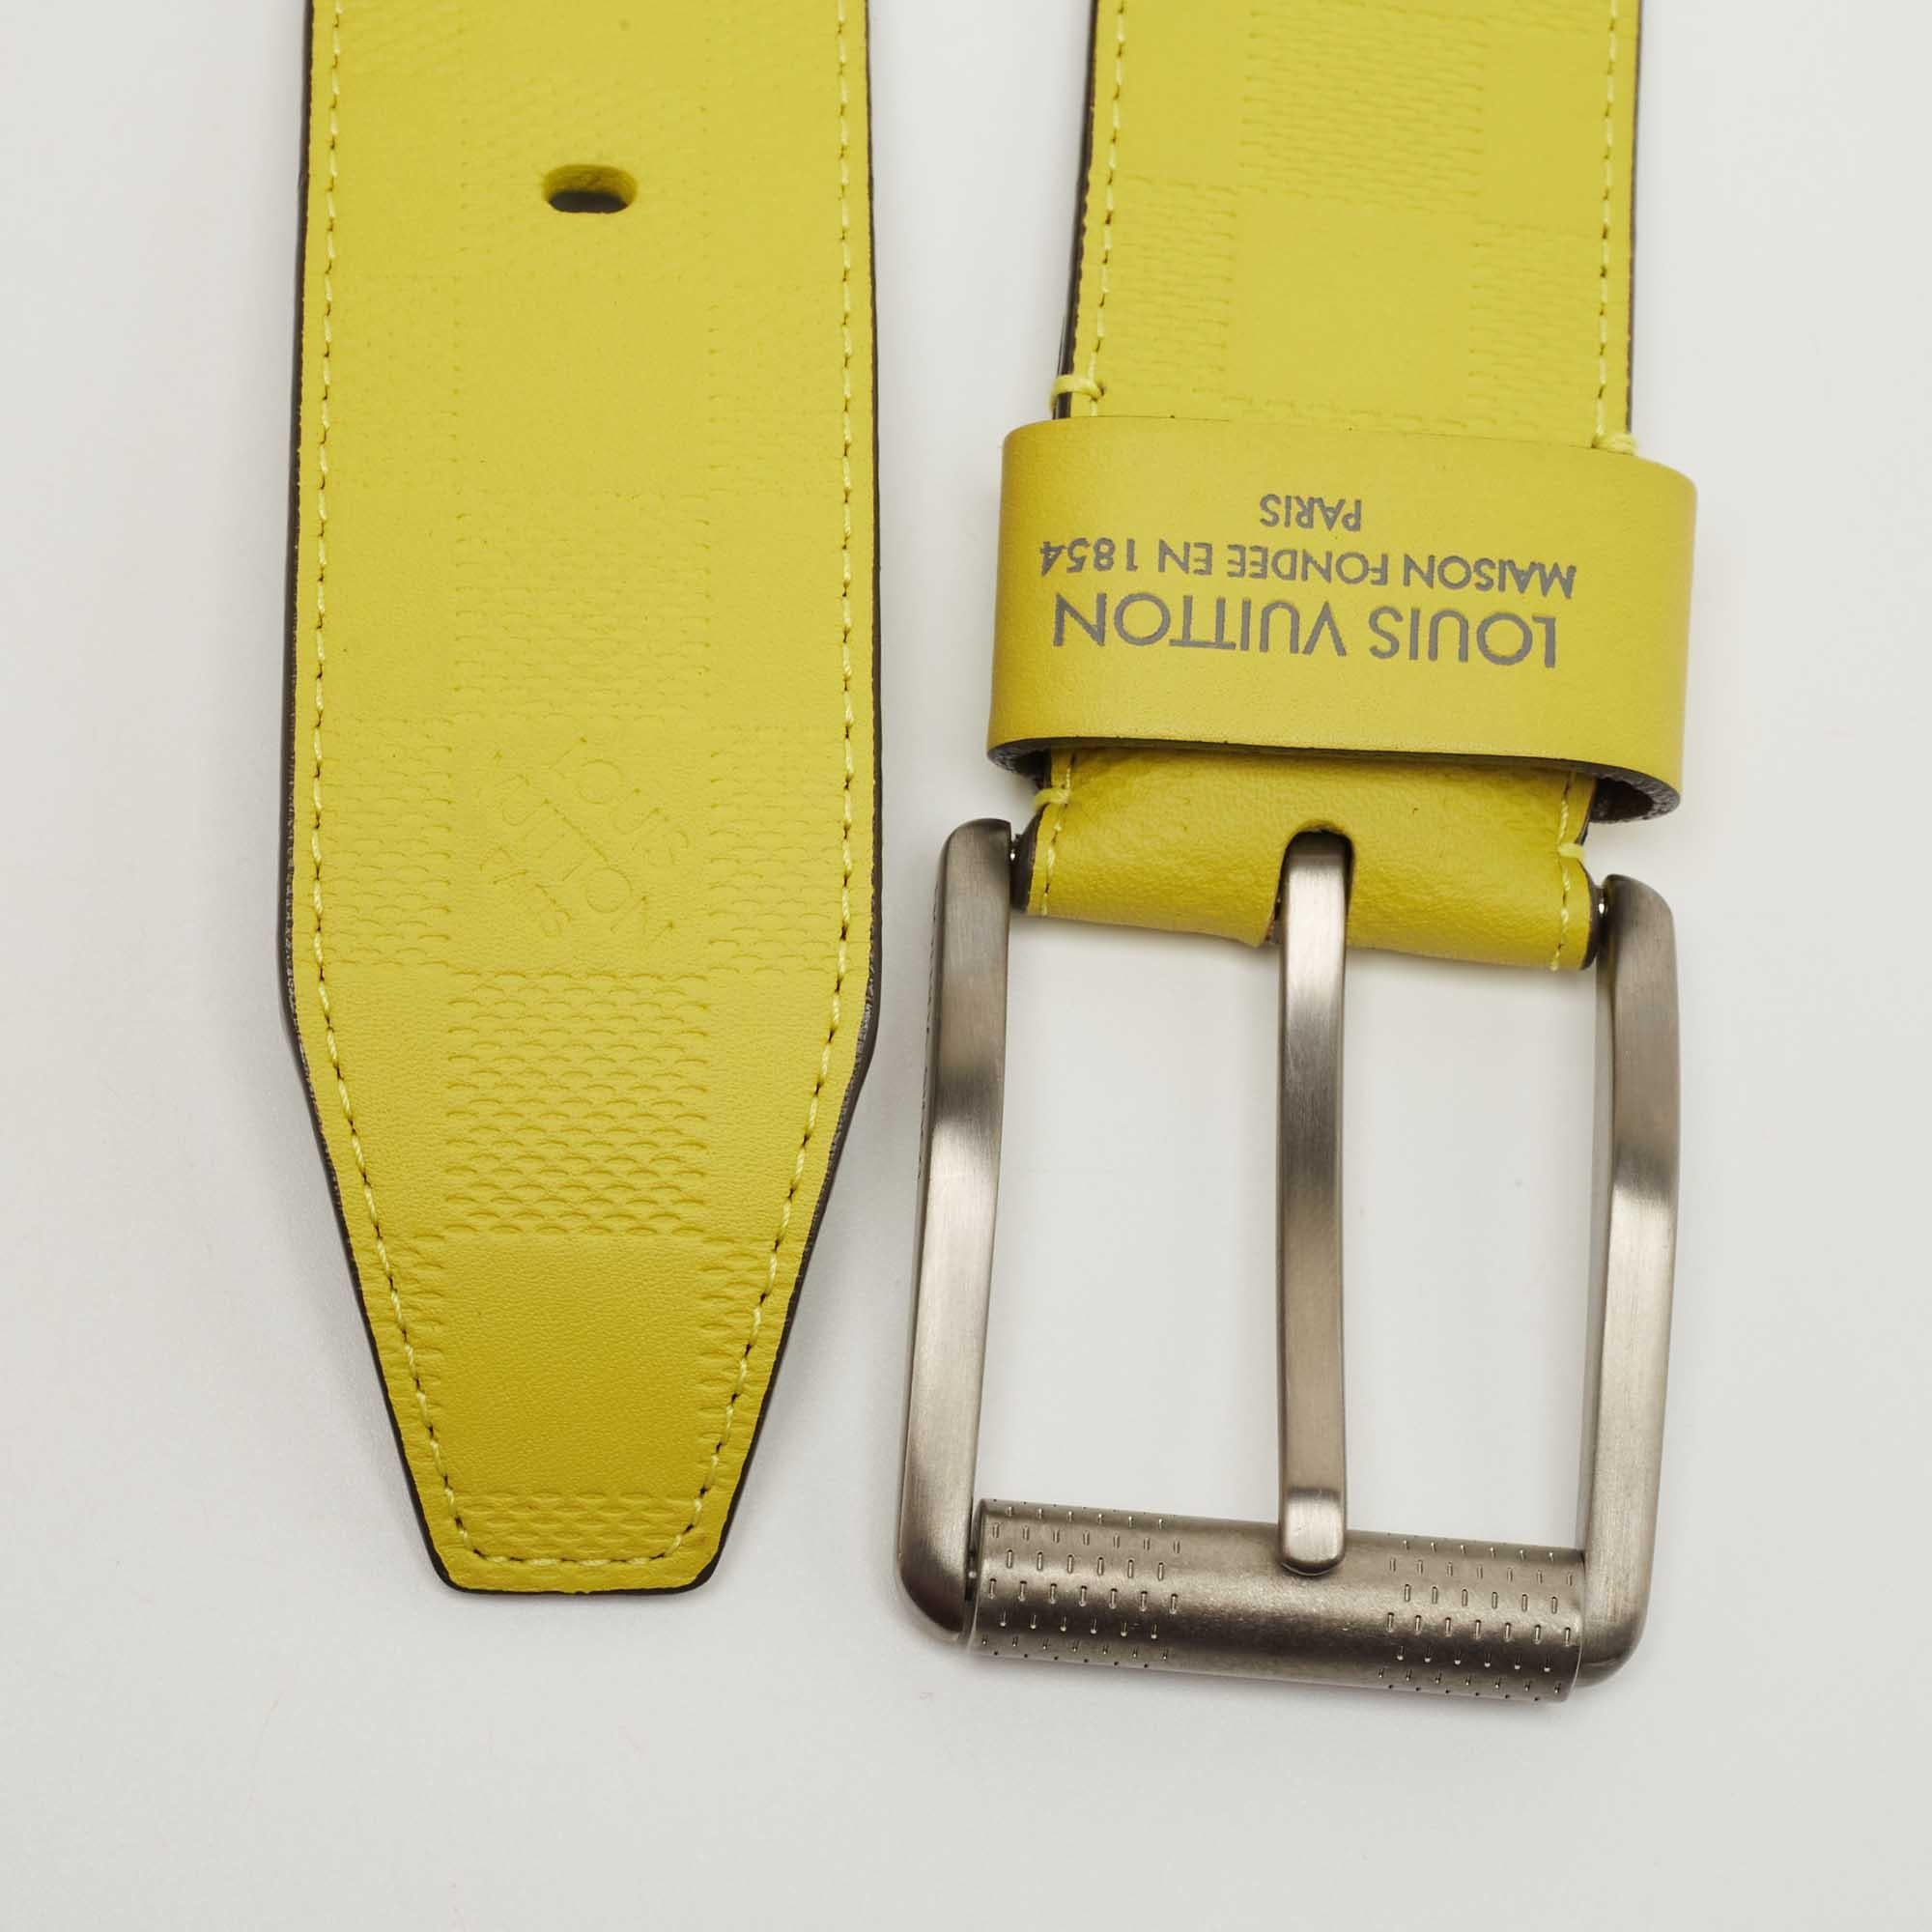 The Louis Vuitton belt is a luxurious fashion accessory crafted from high-quality lime-colored leather. It features an eye-catching damier embossed pattern and a stylish buckle, making it a statement piece for any outfit.

Includes: Original